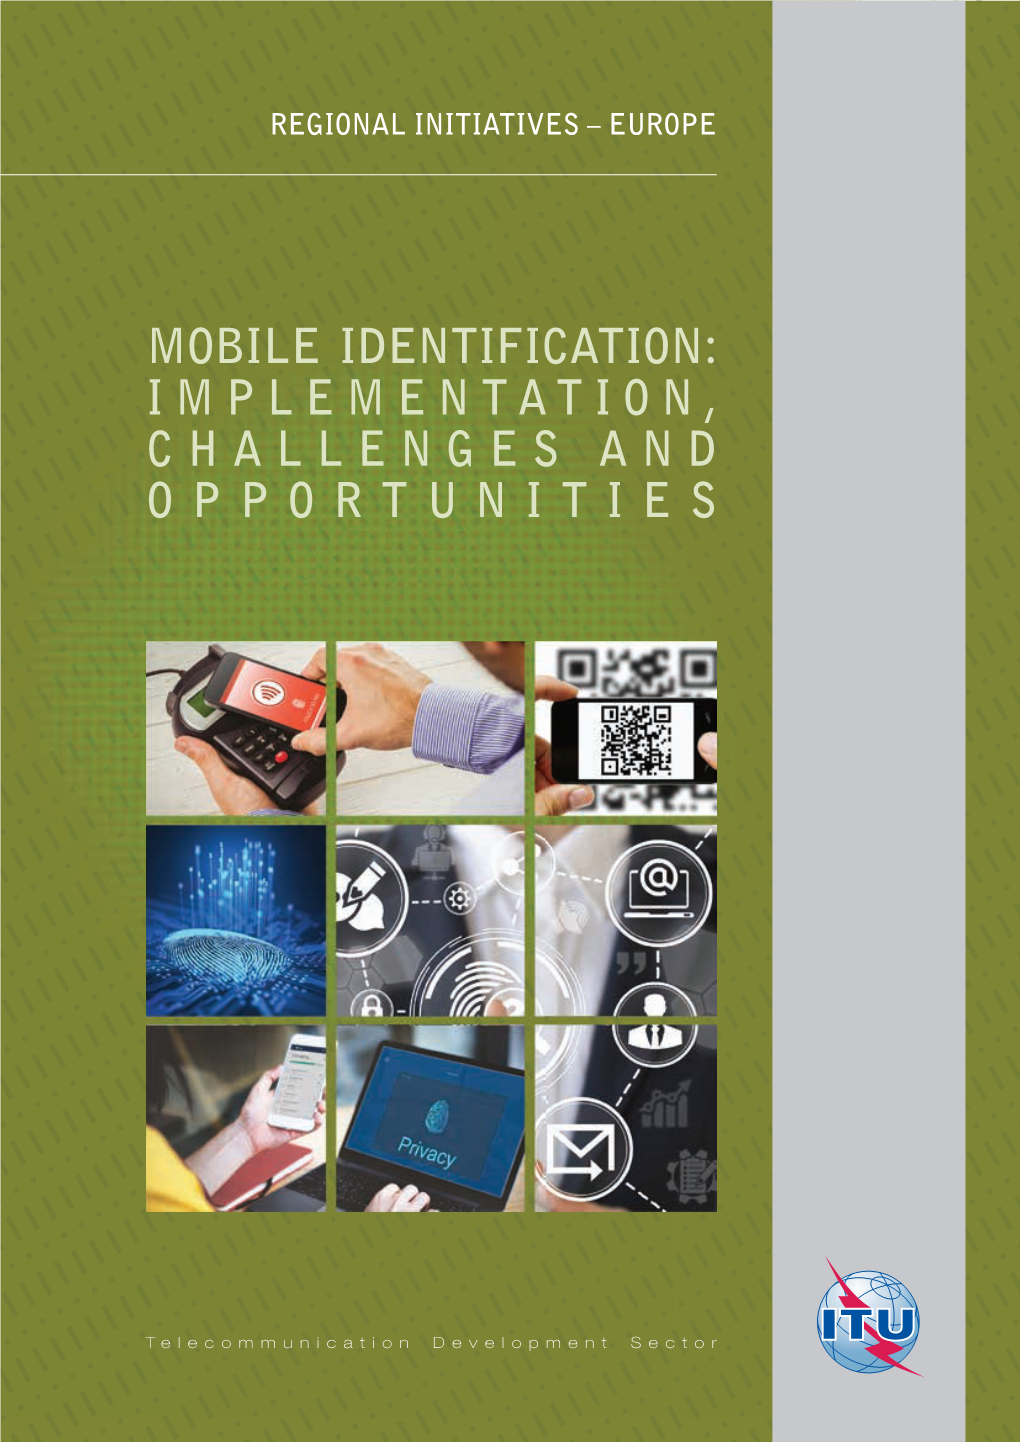 MOBILE IDENTIFICATION: Switzerland IMPLEMENTATION, CHALLENGES and OPPORTUNITIES